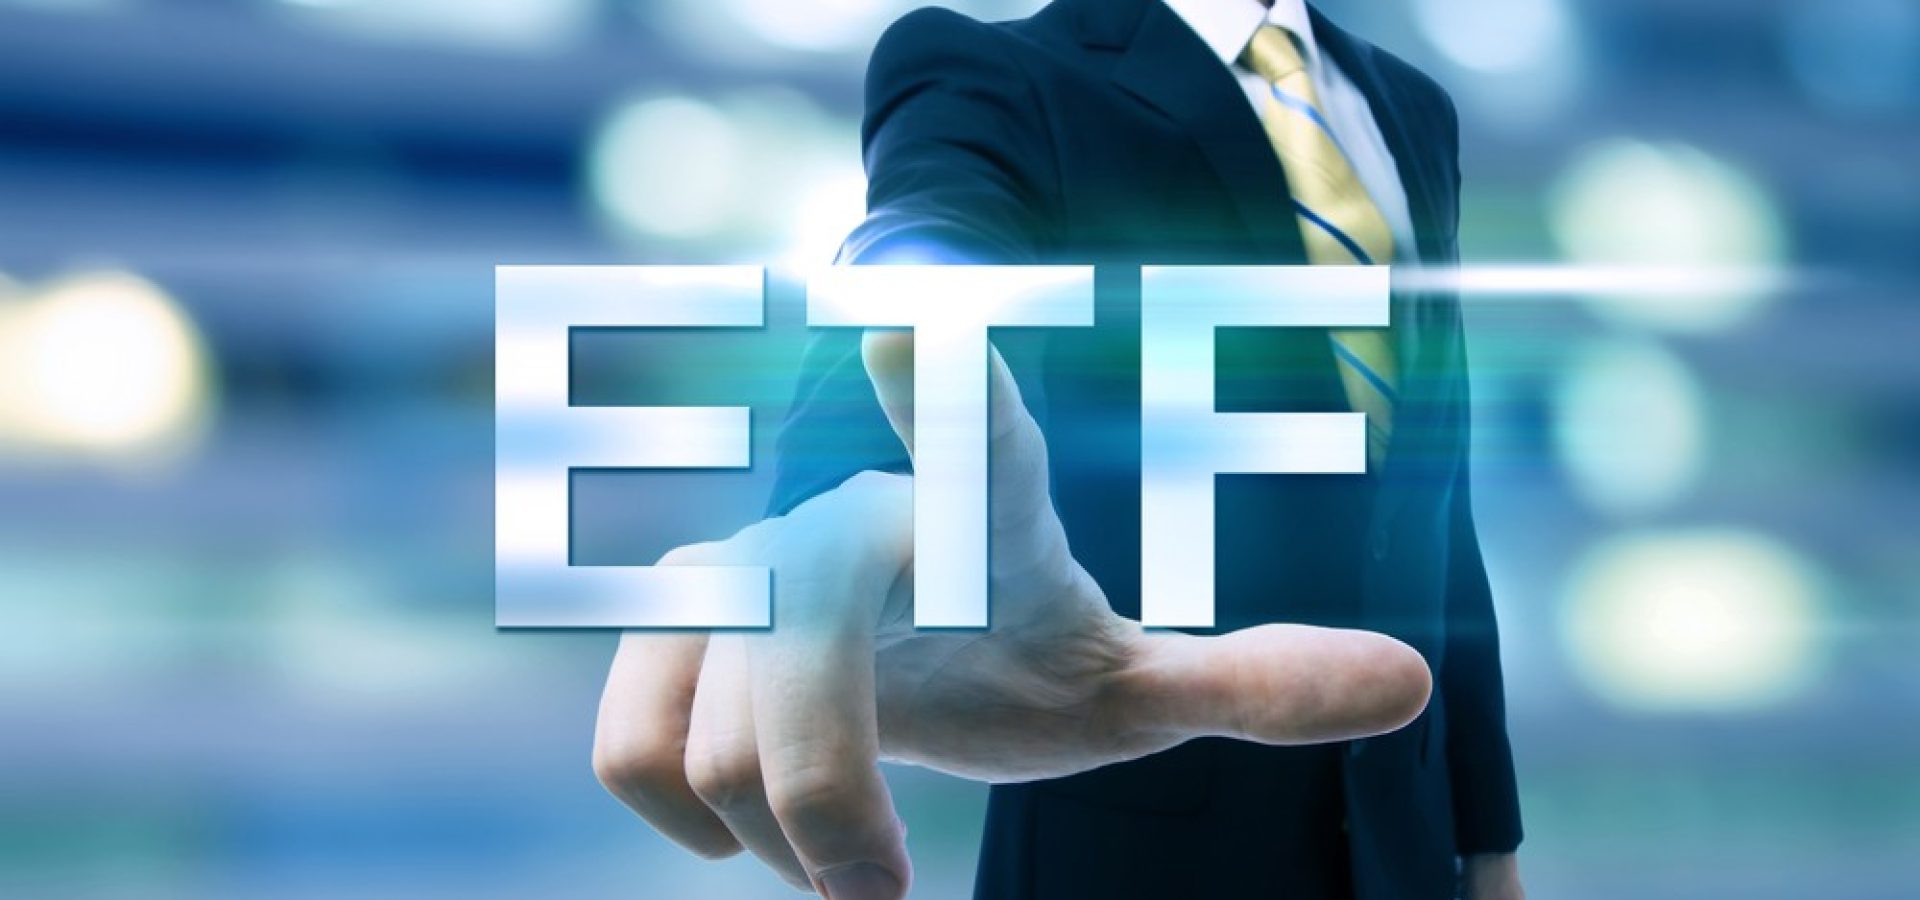 etf - Why Investors Should Invest in Exchange Traded Funds 